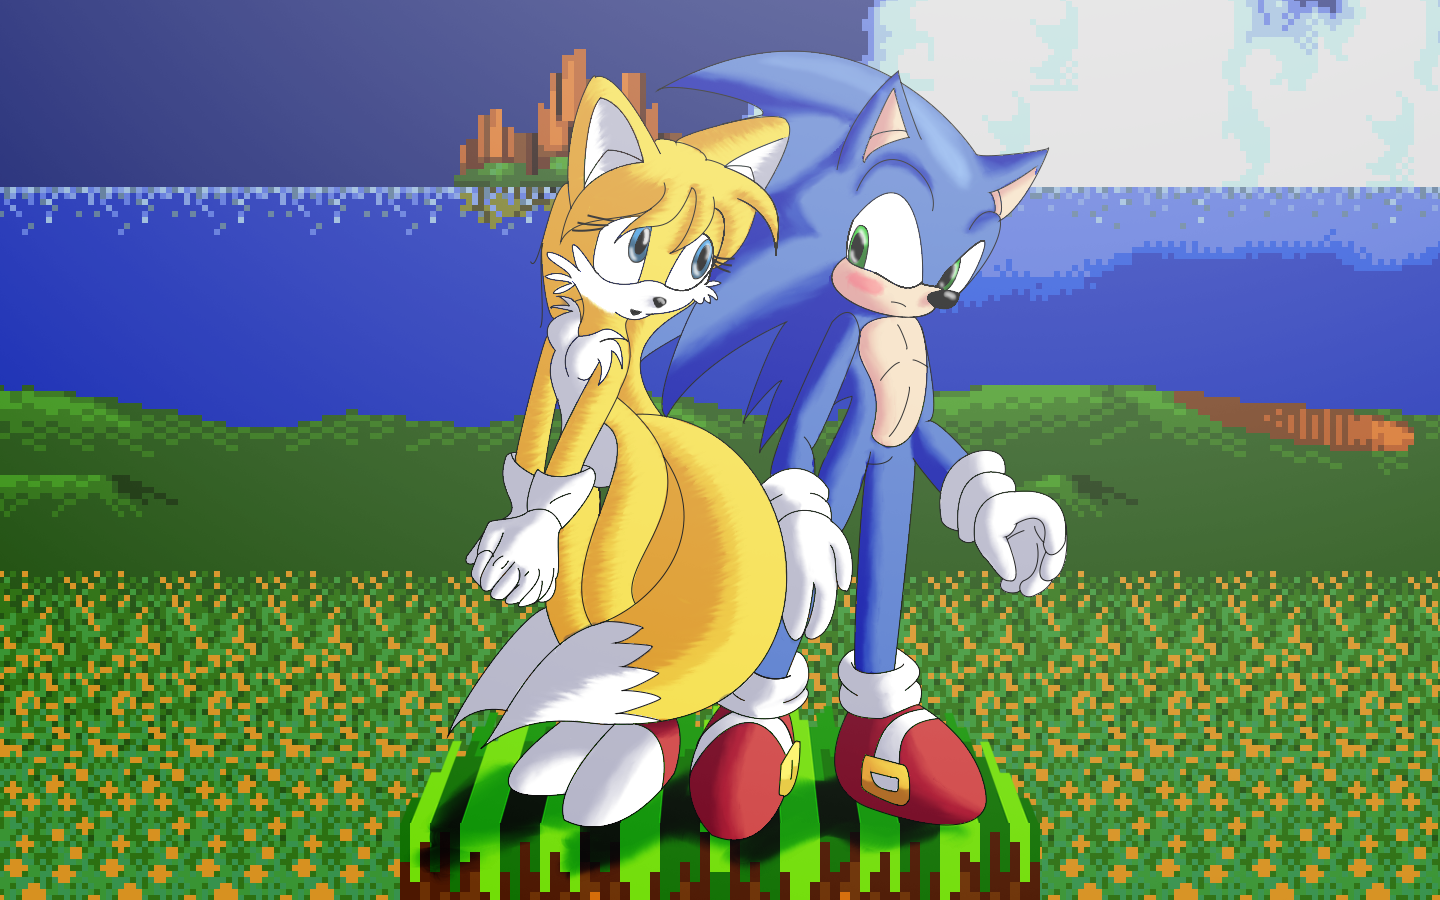 49 Sonic And Tails Wallpaper On WallpaperSafari.